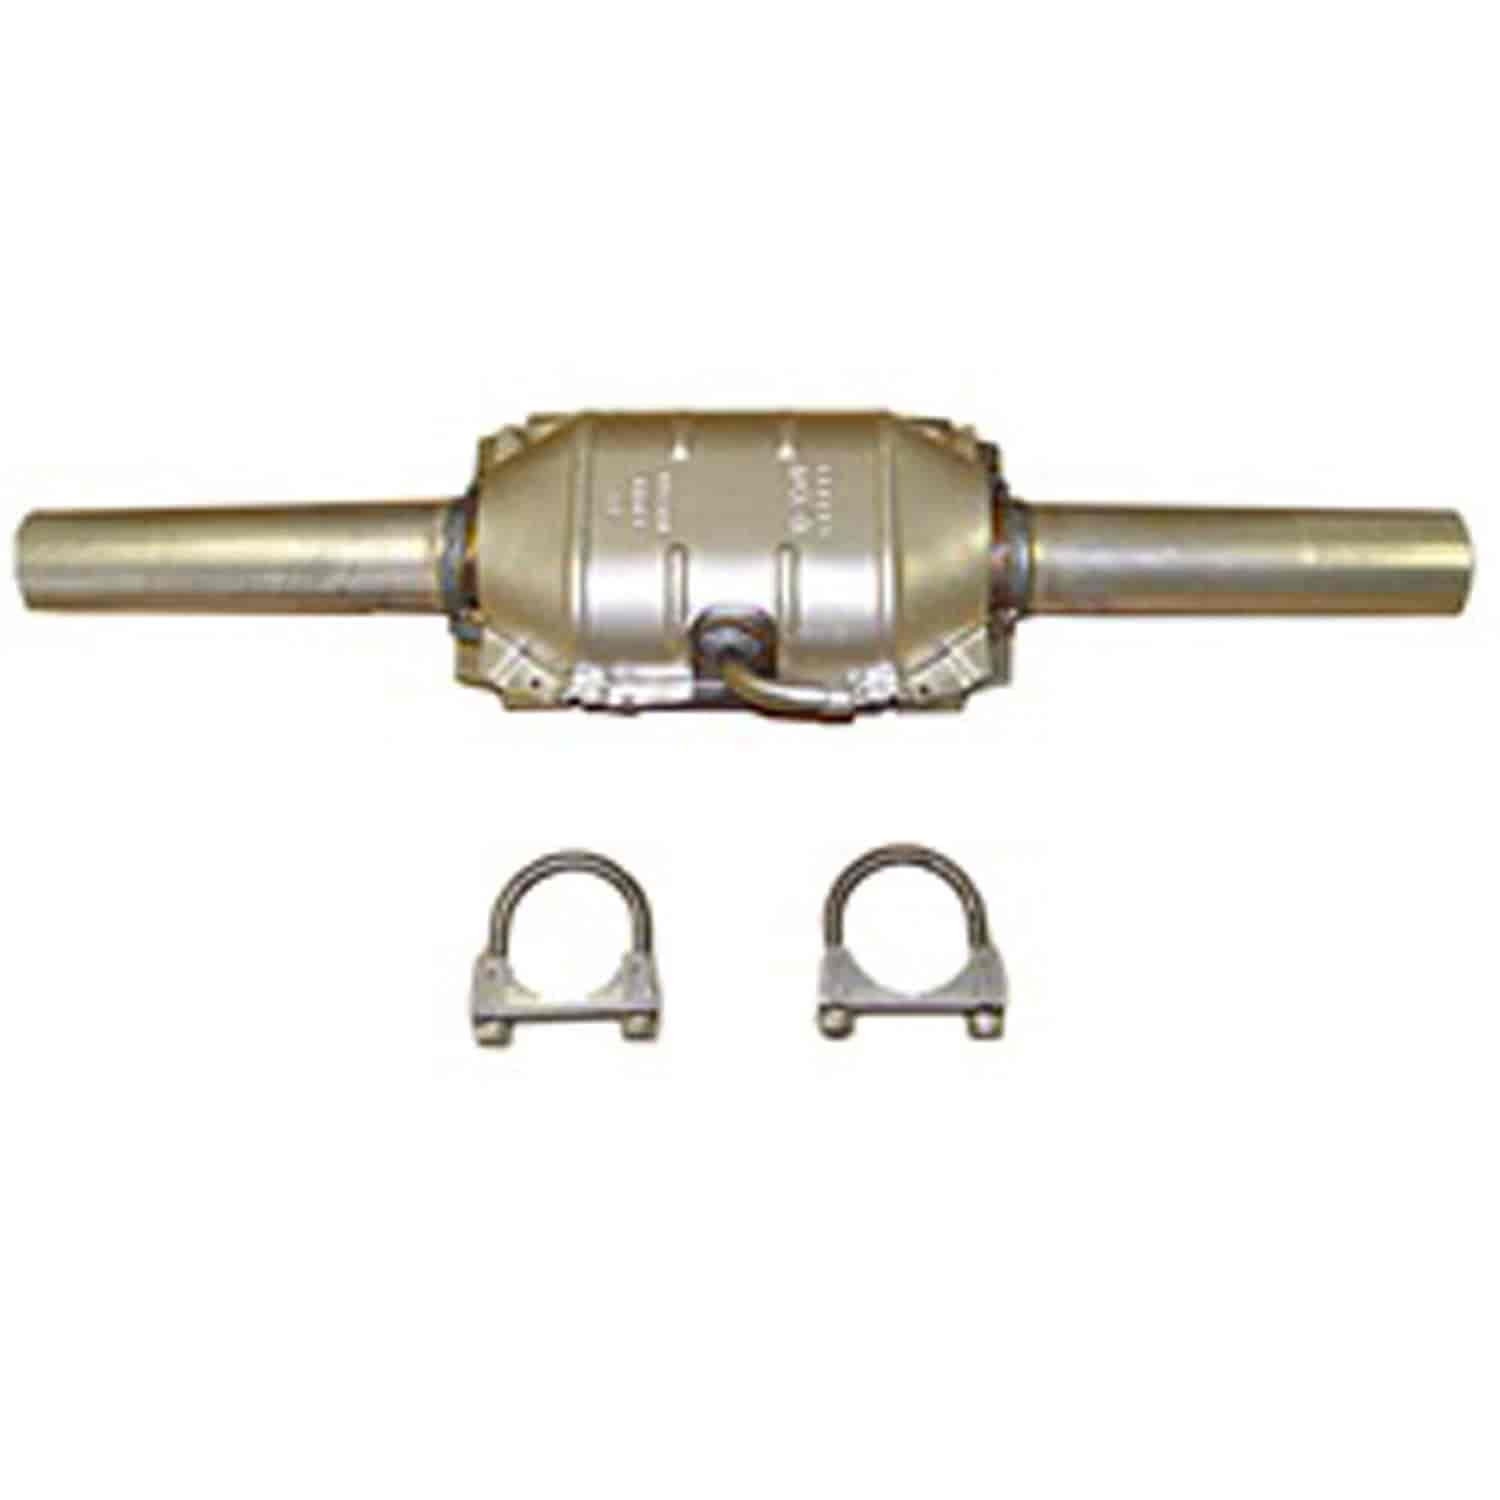 Replacement catalytic converter from Omix-ADA, Fits 81-86 Jeep CJ models